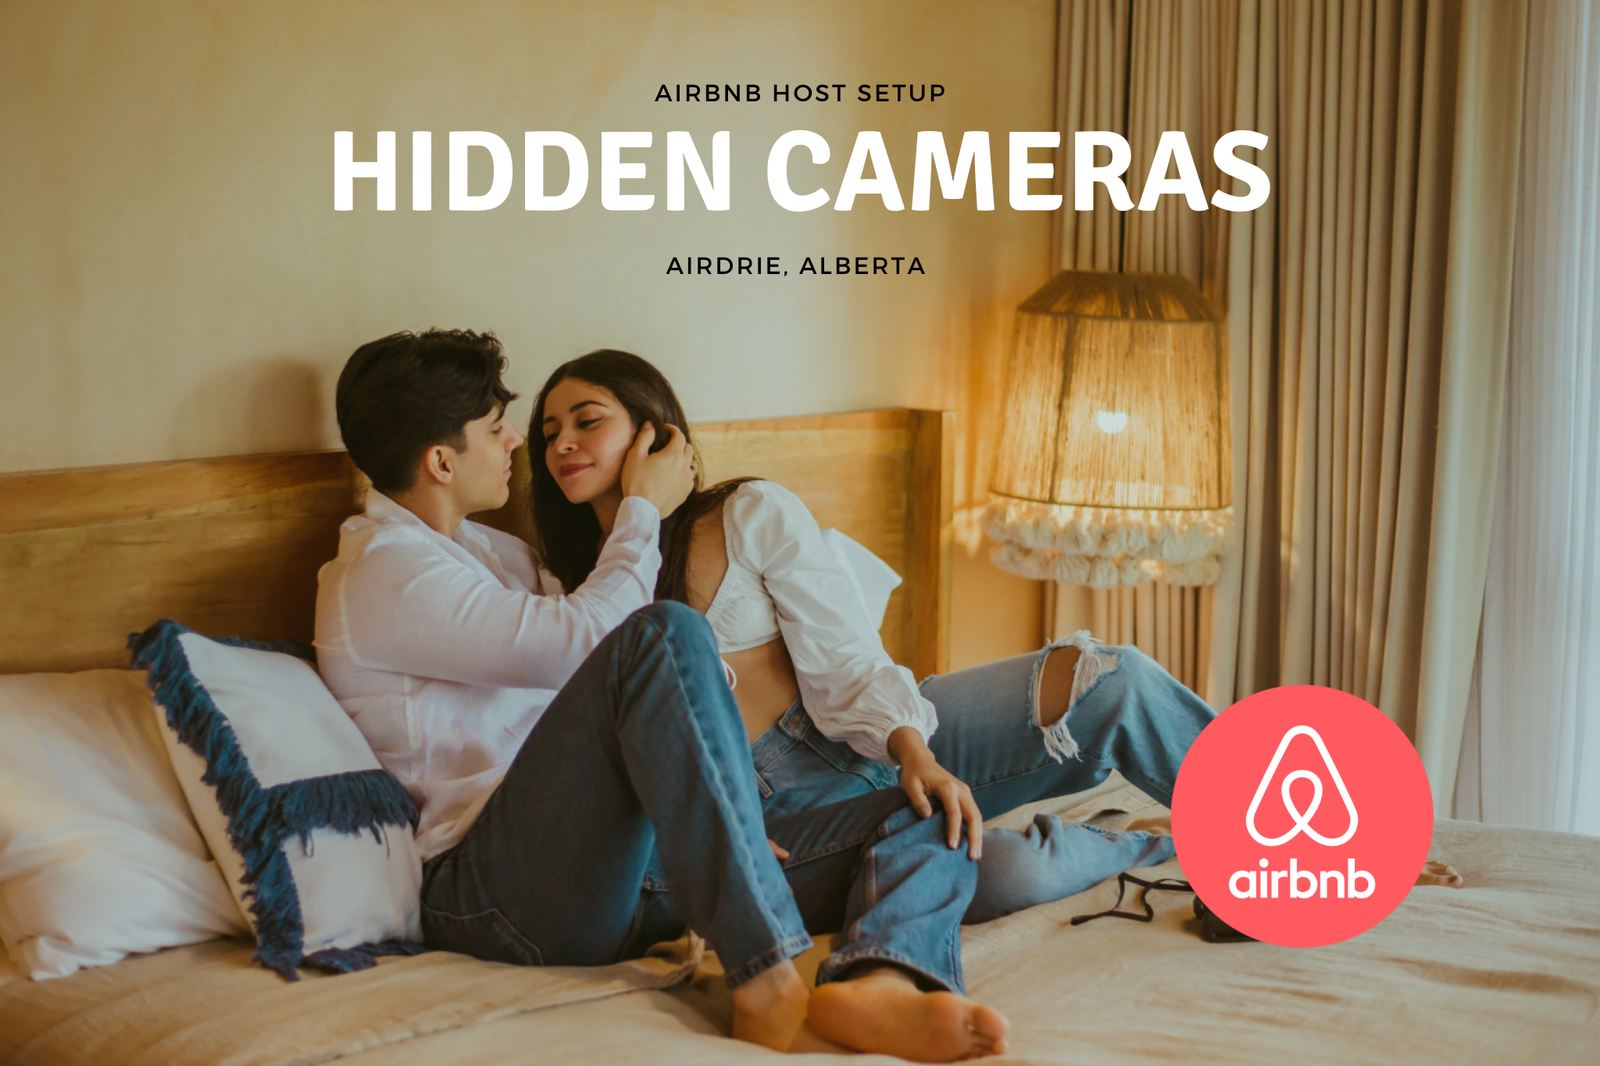 Hidden Camera Discovered in Airdrie Airbnb Rental Property Raises Concerns for Guest Privacy and Safety